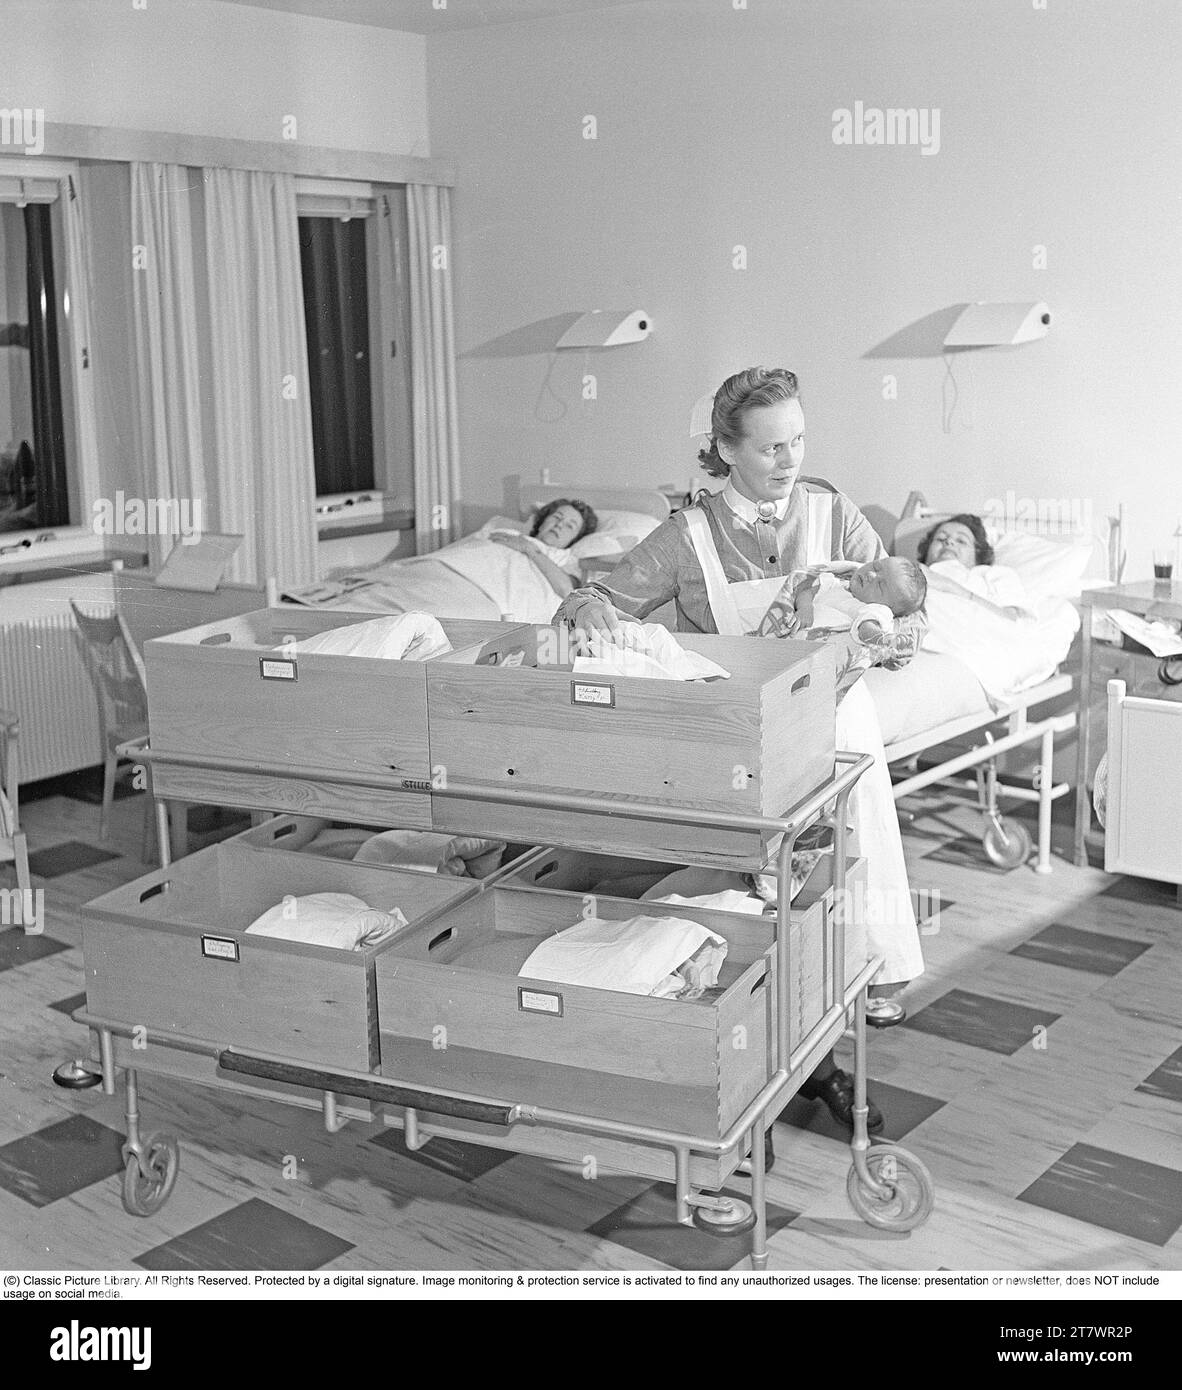 Interior from the ward for new mothers at Södersjukhuset in Stockholm where a midwife holds a newborn baby. The newborn babies lie in wooden boxes on a cart. The boxes are labeled with numbers and names. On the box that the midwife will put the baby in, it says 43 Lindberg, which is a girl who weighed 3650 grams. The new mothers lie in beds in the room. Sweden 1949. Kristoffersson ref AU33-1 Stock Photo